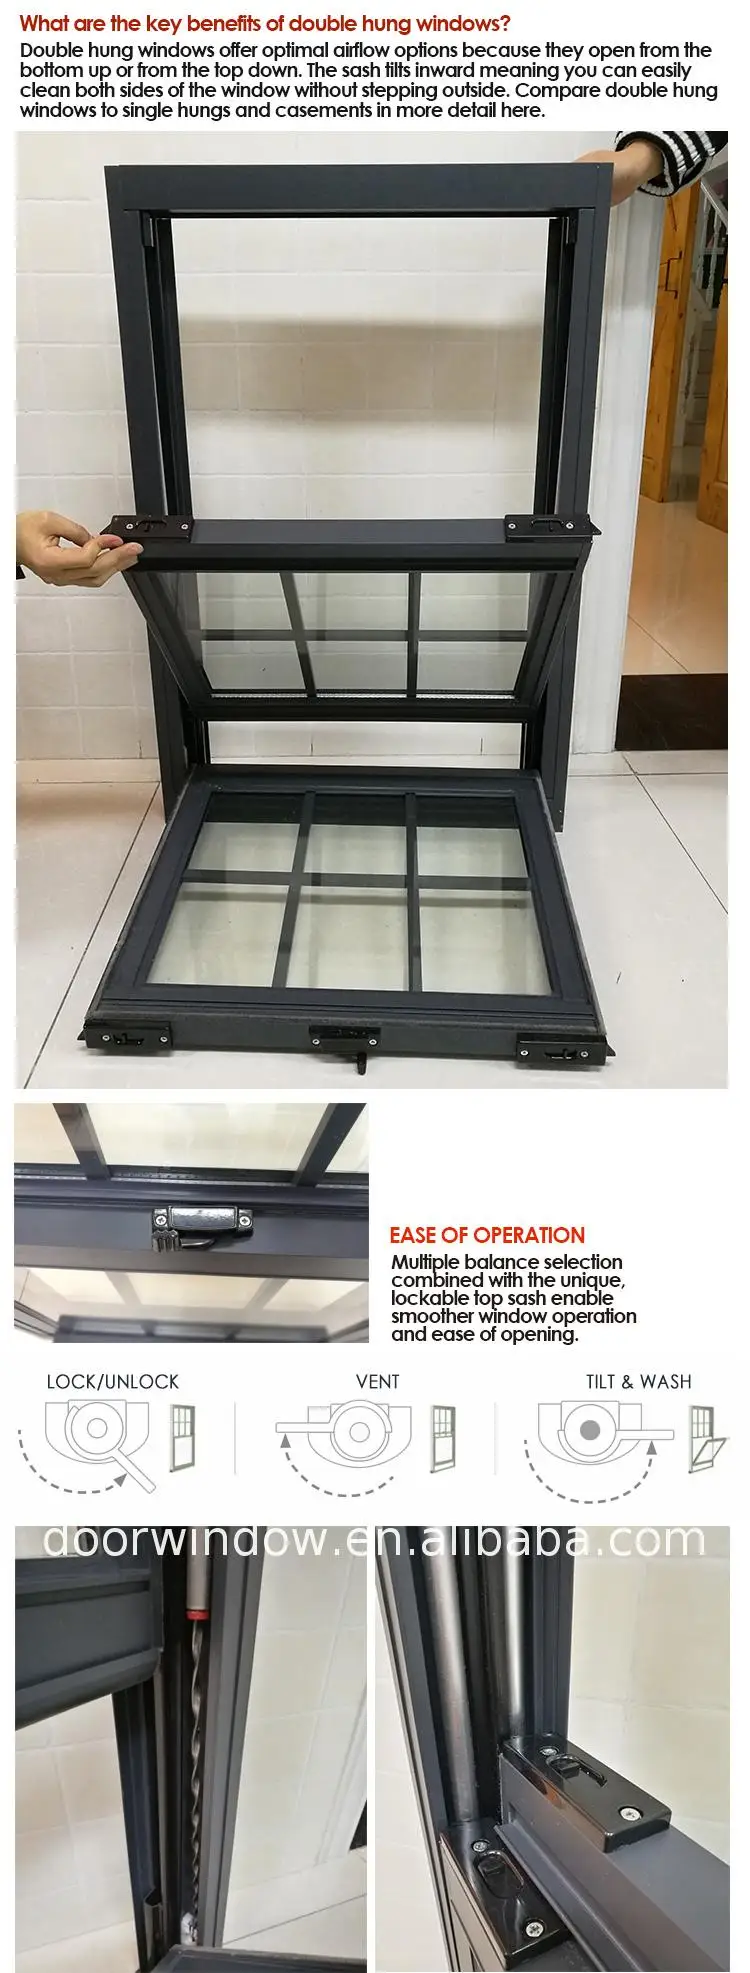 Hot Sale respray aluminium windows replacing casement with double hung removing